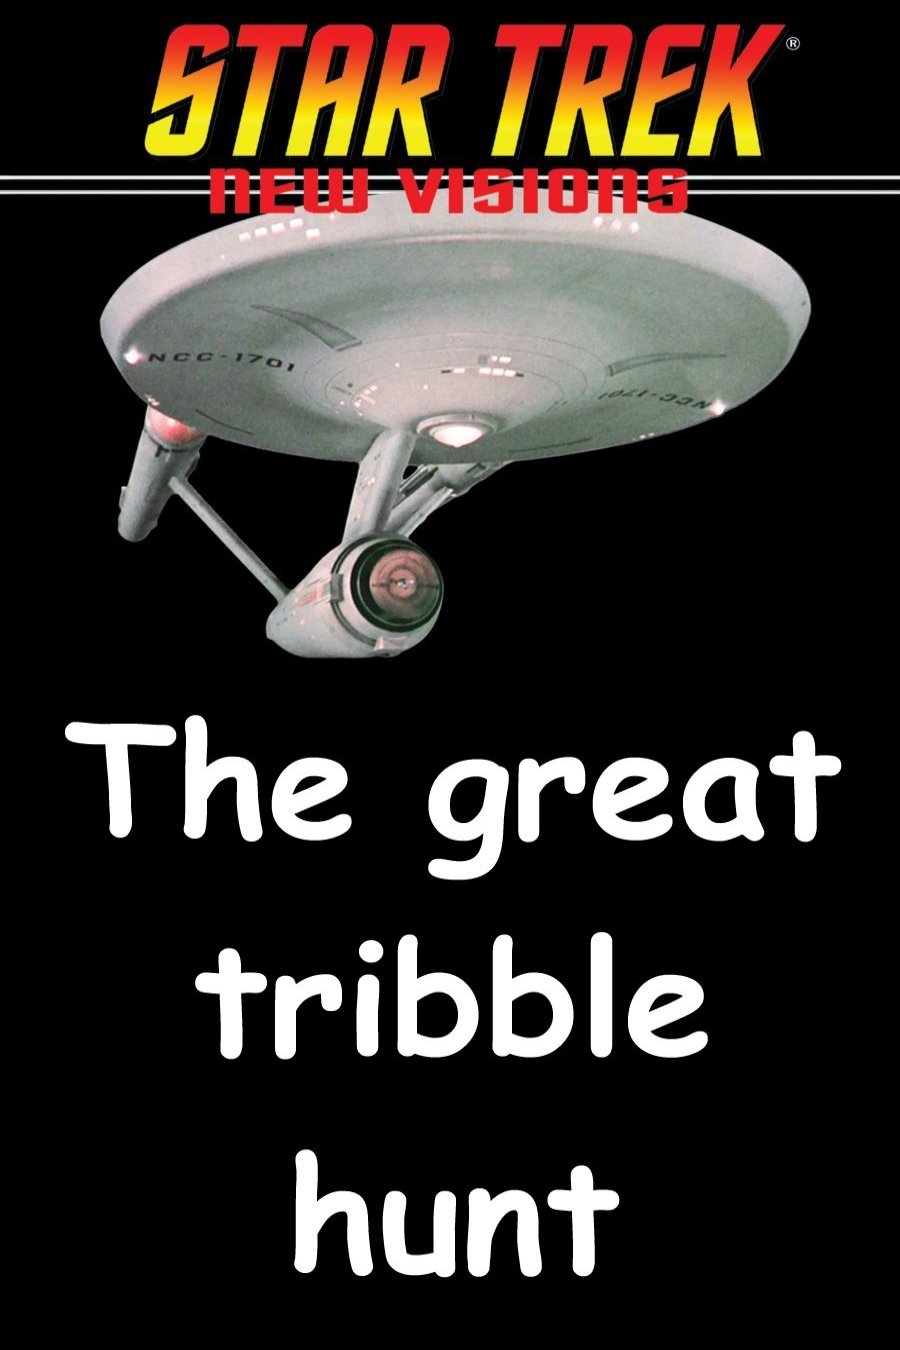 The great tribble hunt.